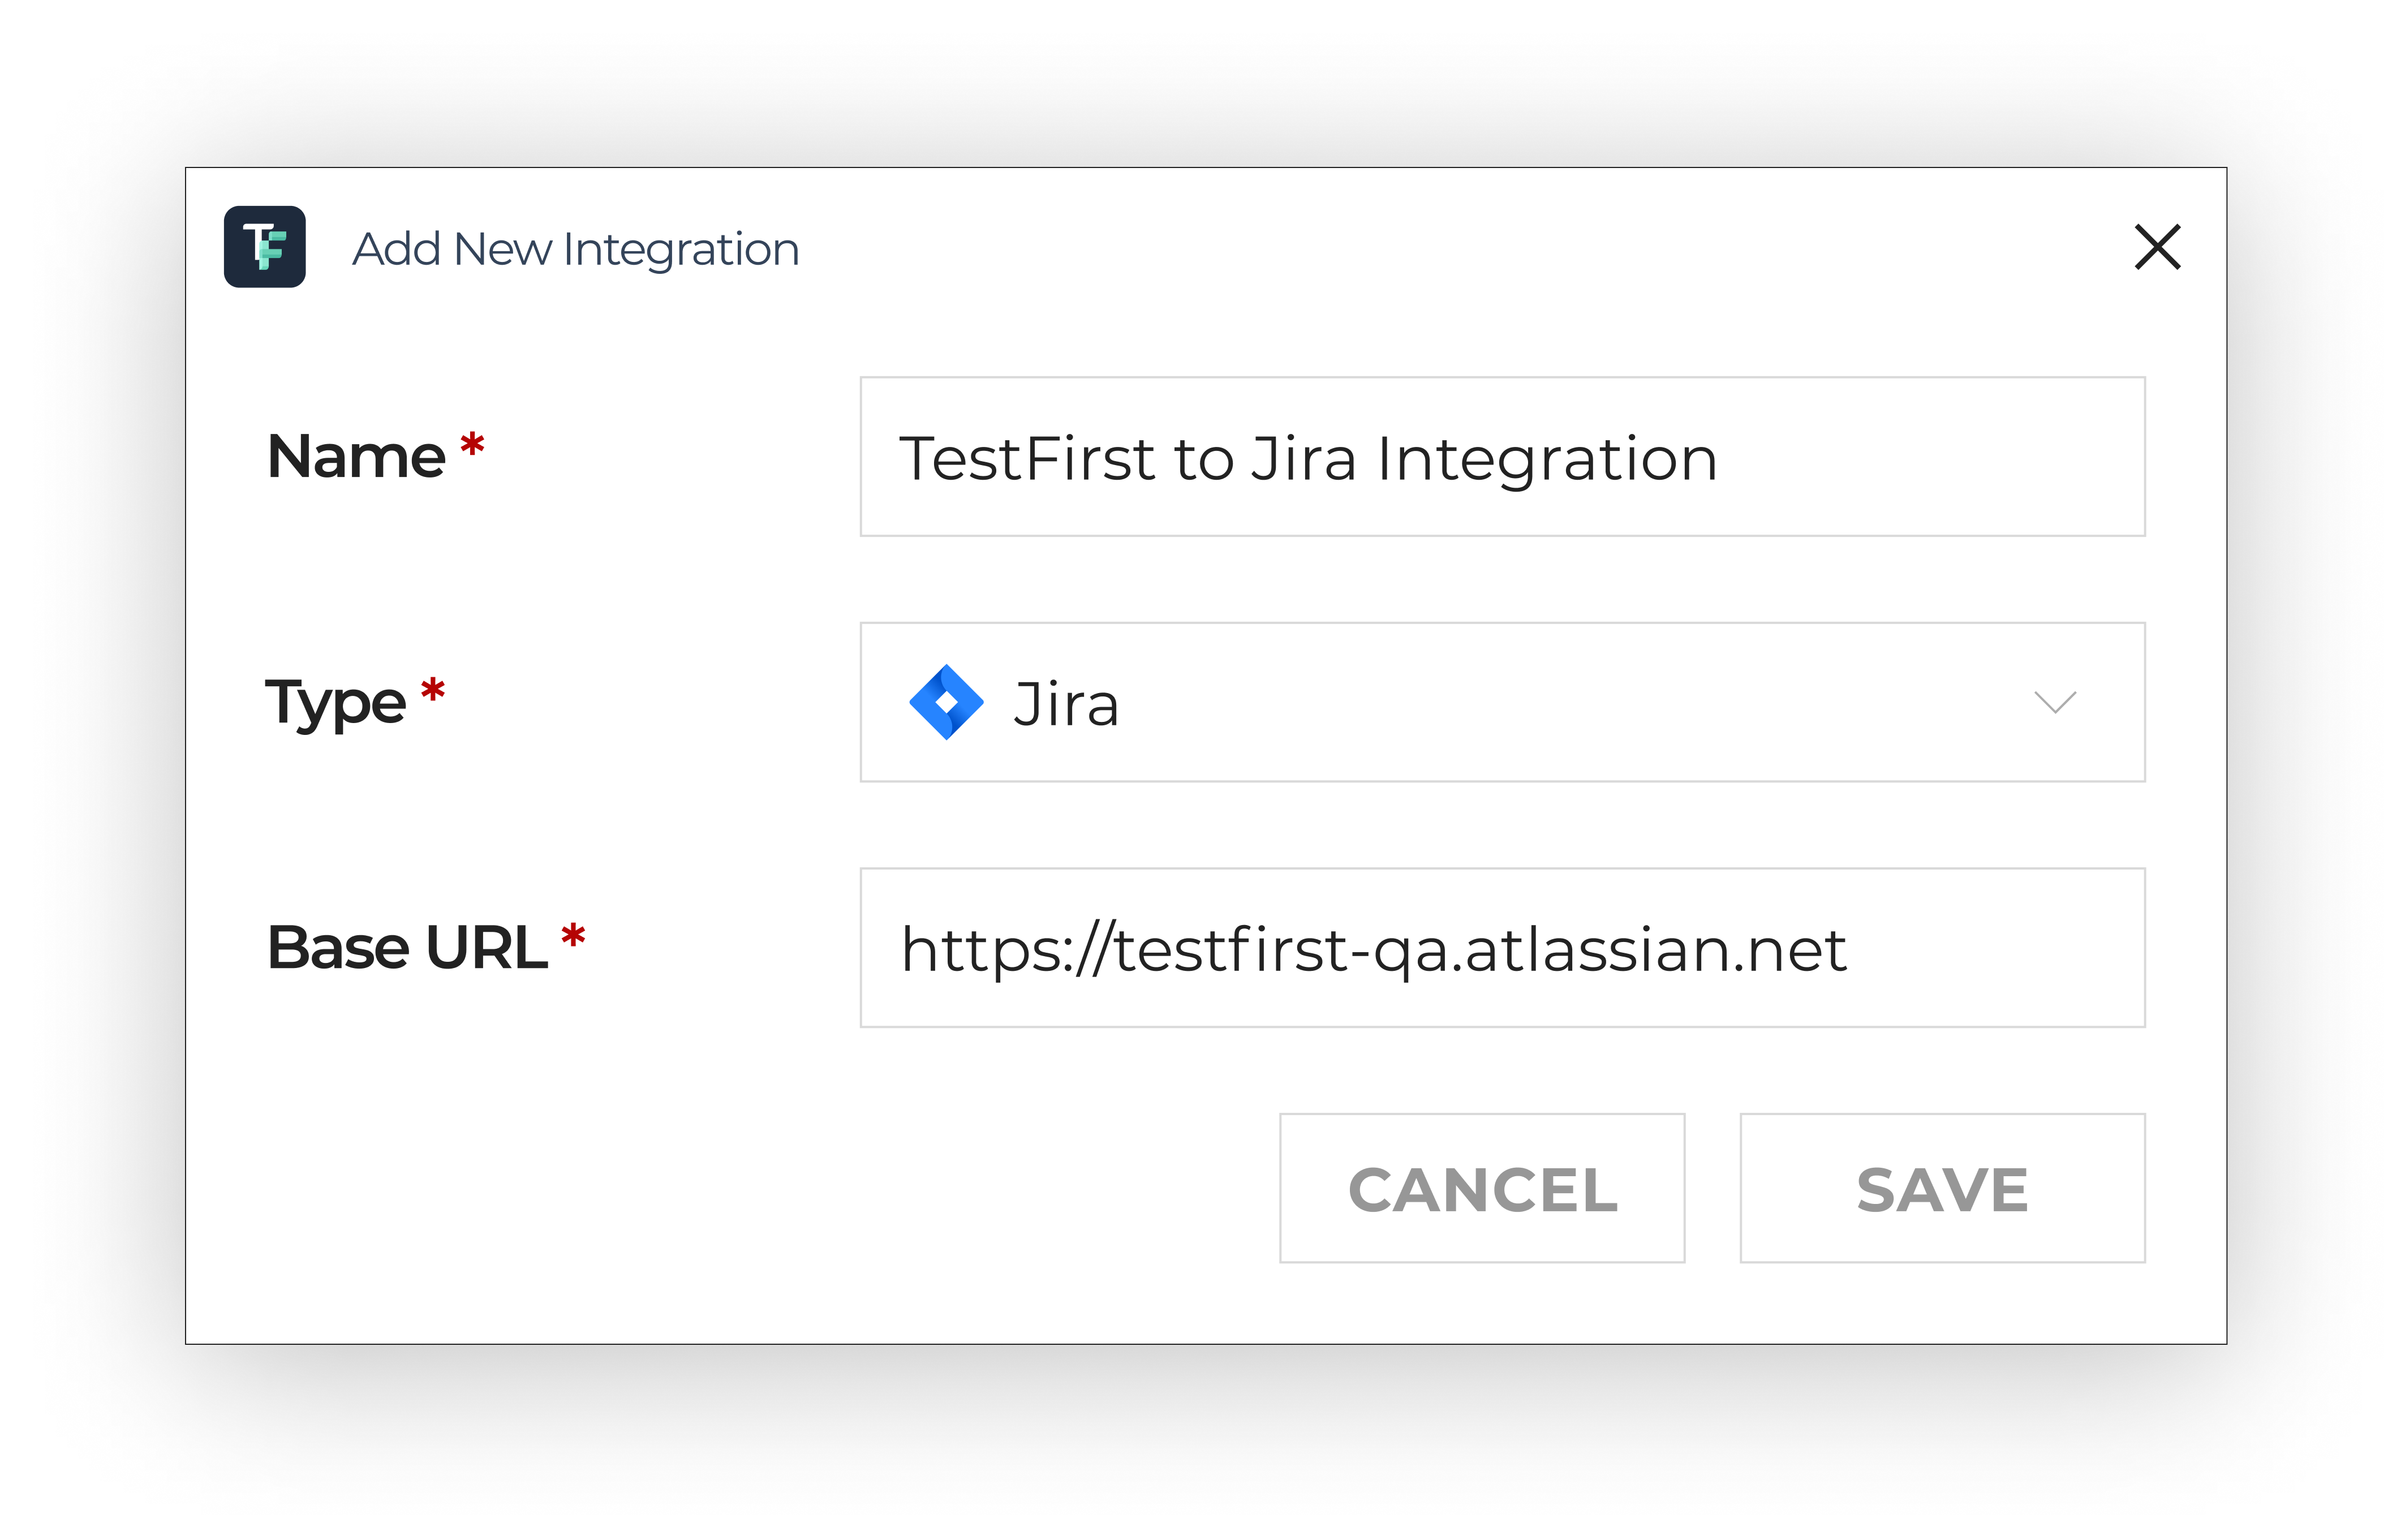 Create bug reports 4.5x faster with Jira integration